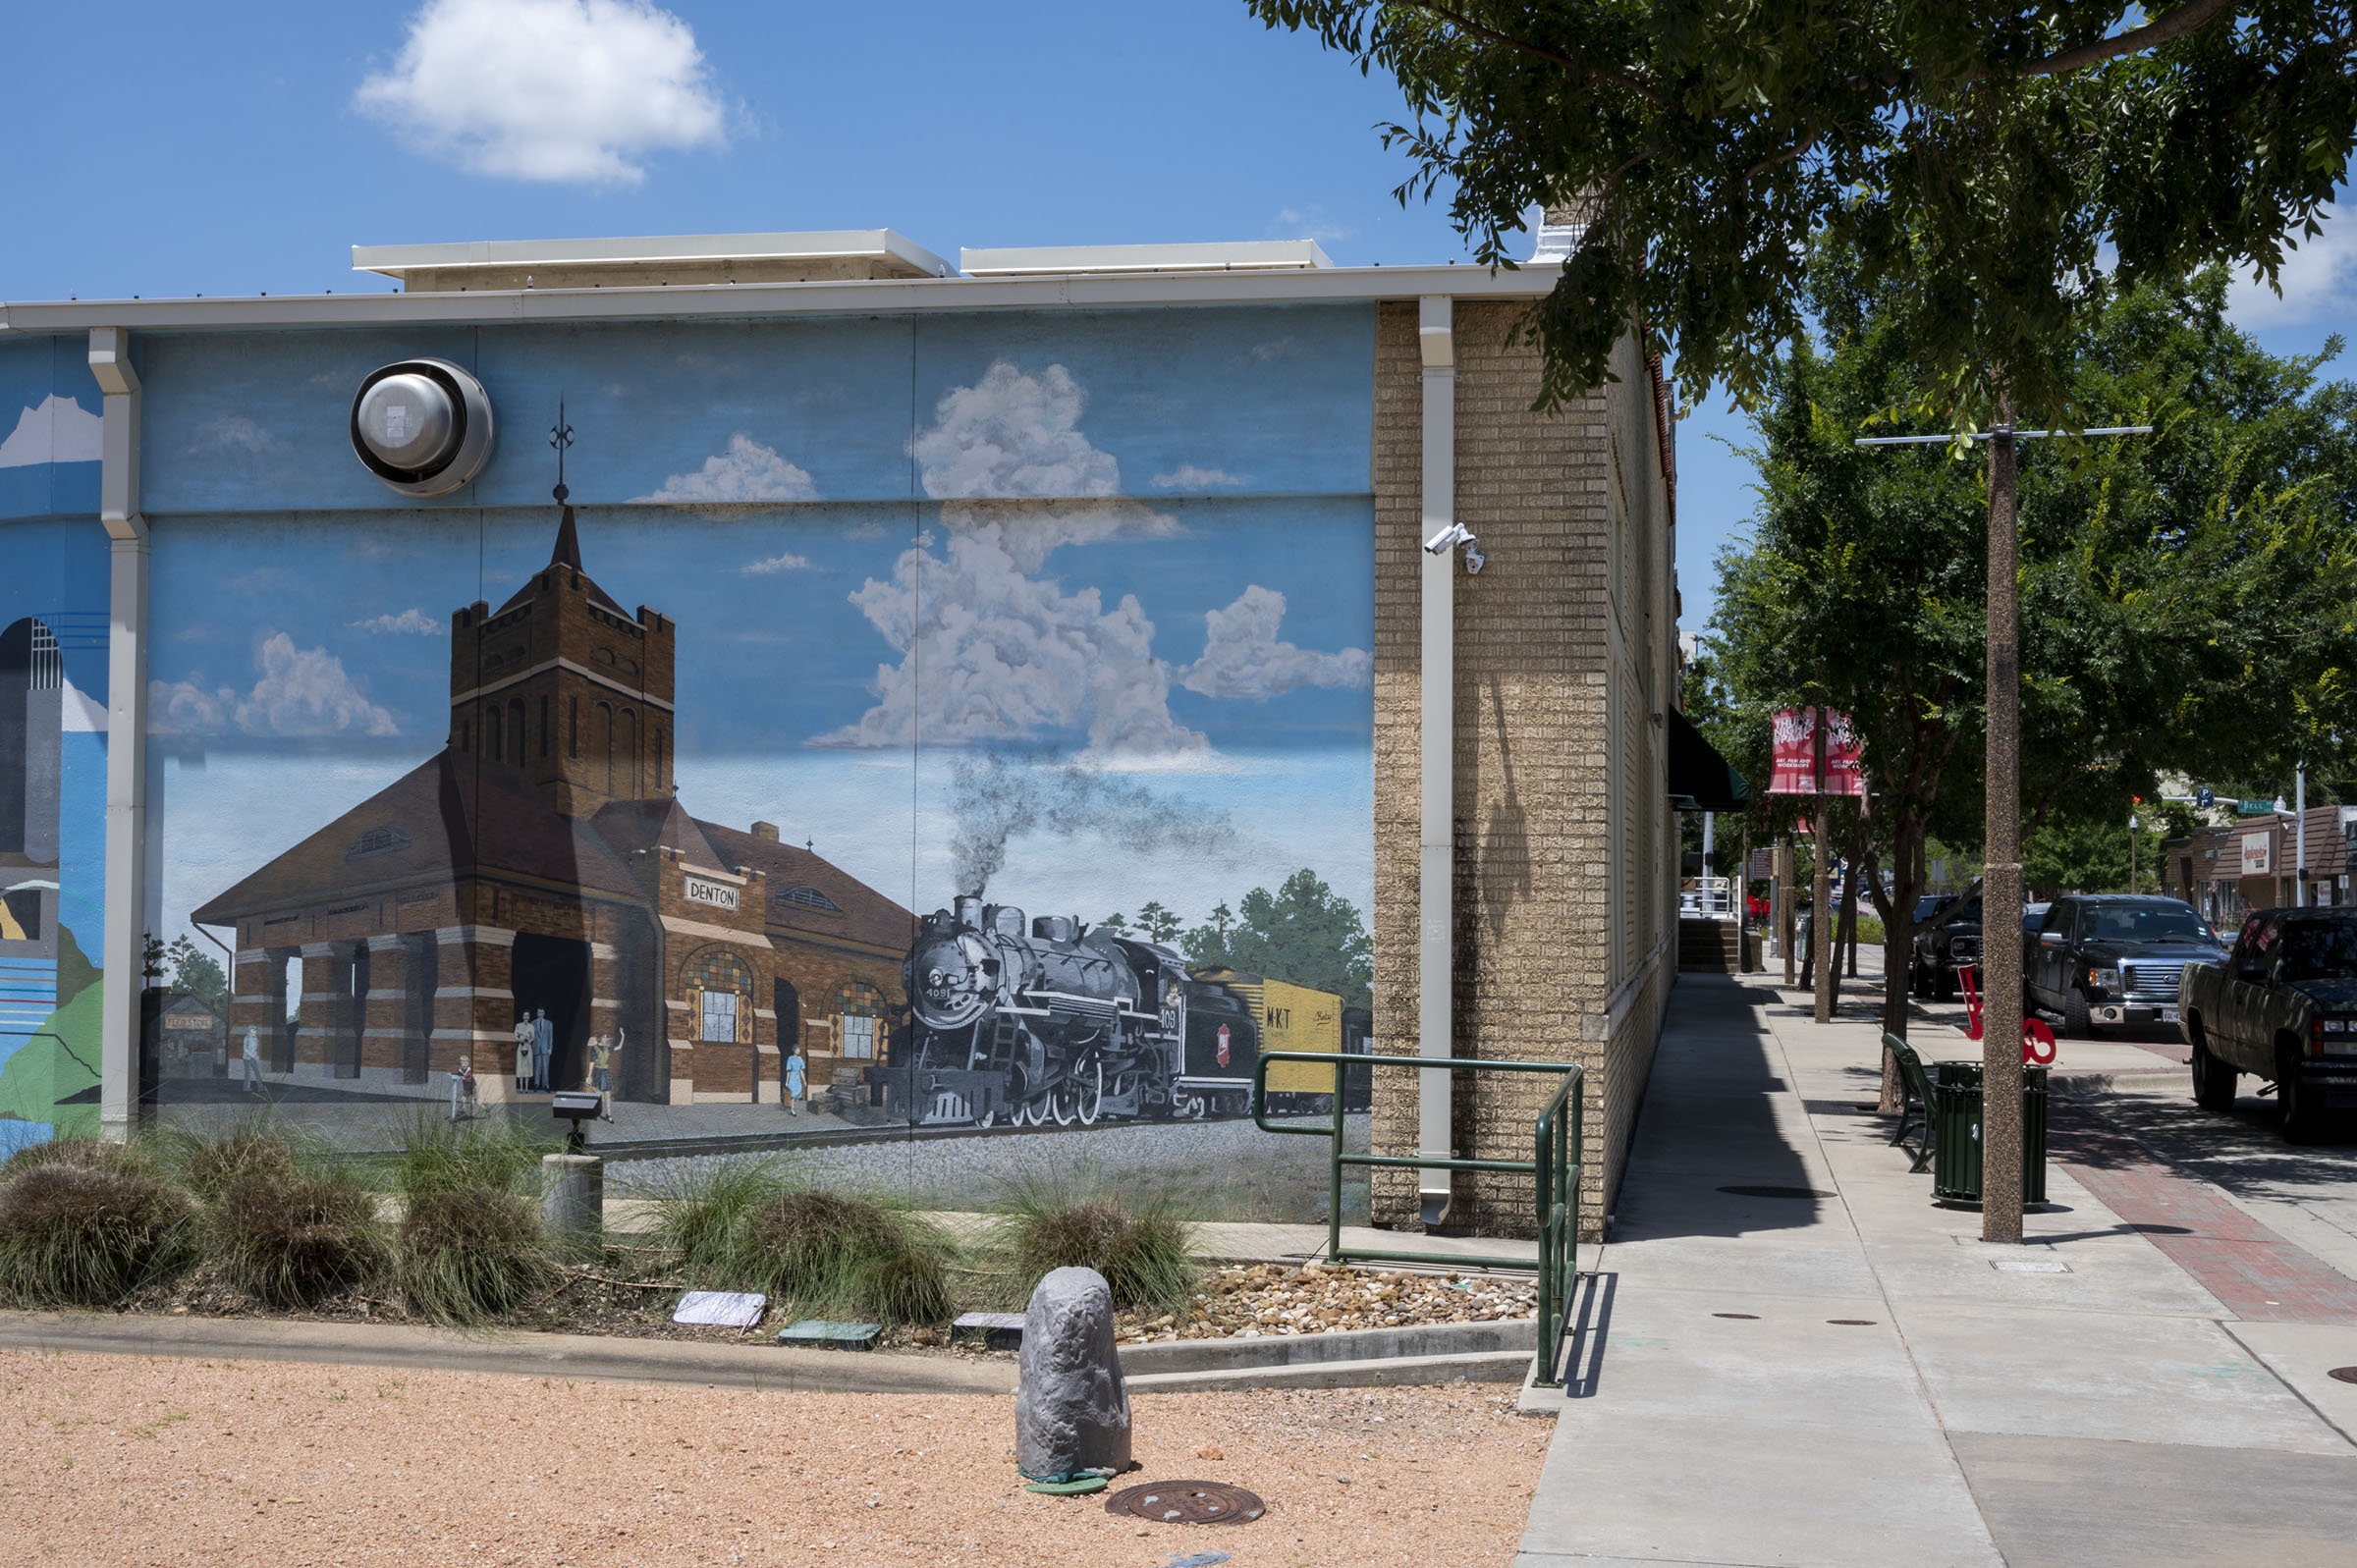 A mural featuring a small town scene on the side of a single-story building